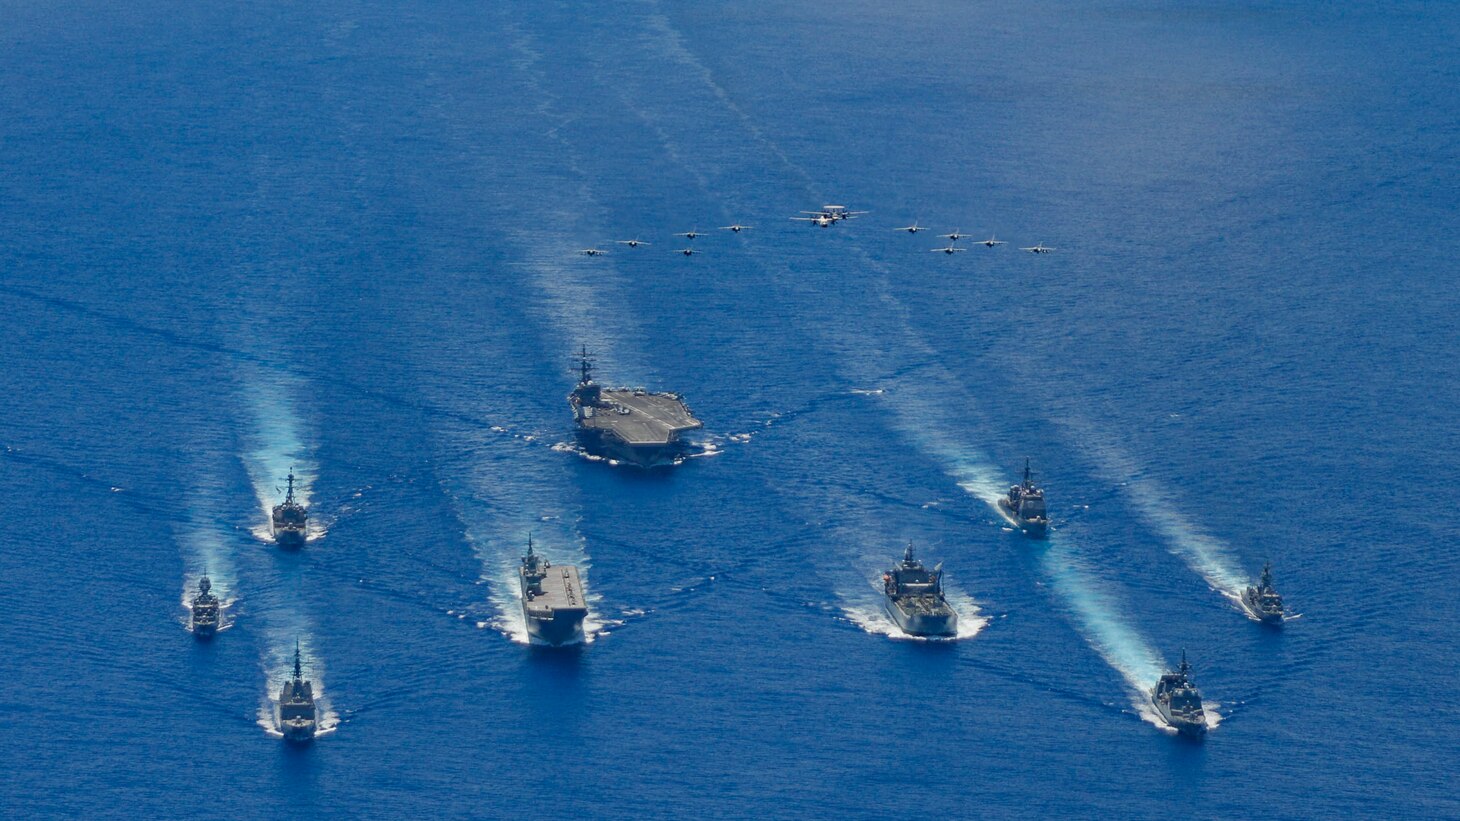 The Ronald Reagan Carrier Strike Group and units from the Japan Maritime Self-Defense Force (JSMDF) and Australian Defense Force (ADF) participate in trilateral exercises supporting shared goals of peace and stability, while enhancing regional security and the right of all nations to trade, communicate, and choose their destiny in a Free and Open Indo-Pacific. The Ronald Reagan Carrier Strike Group is the U.S. Navy's only forward-deployed strike group and one of America's most visible symbols of resolve.